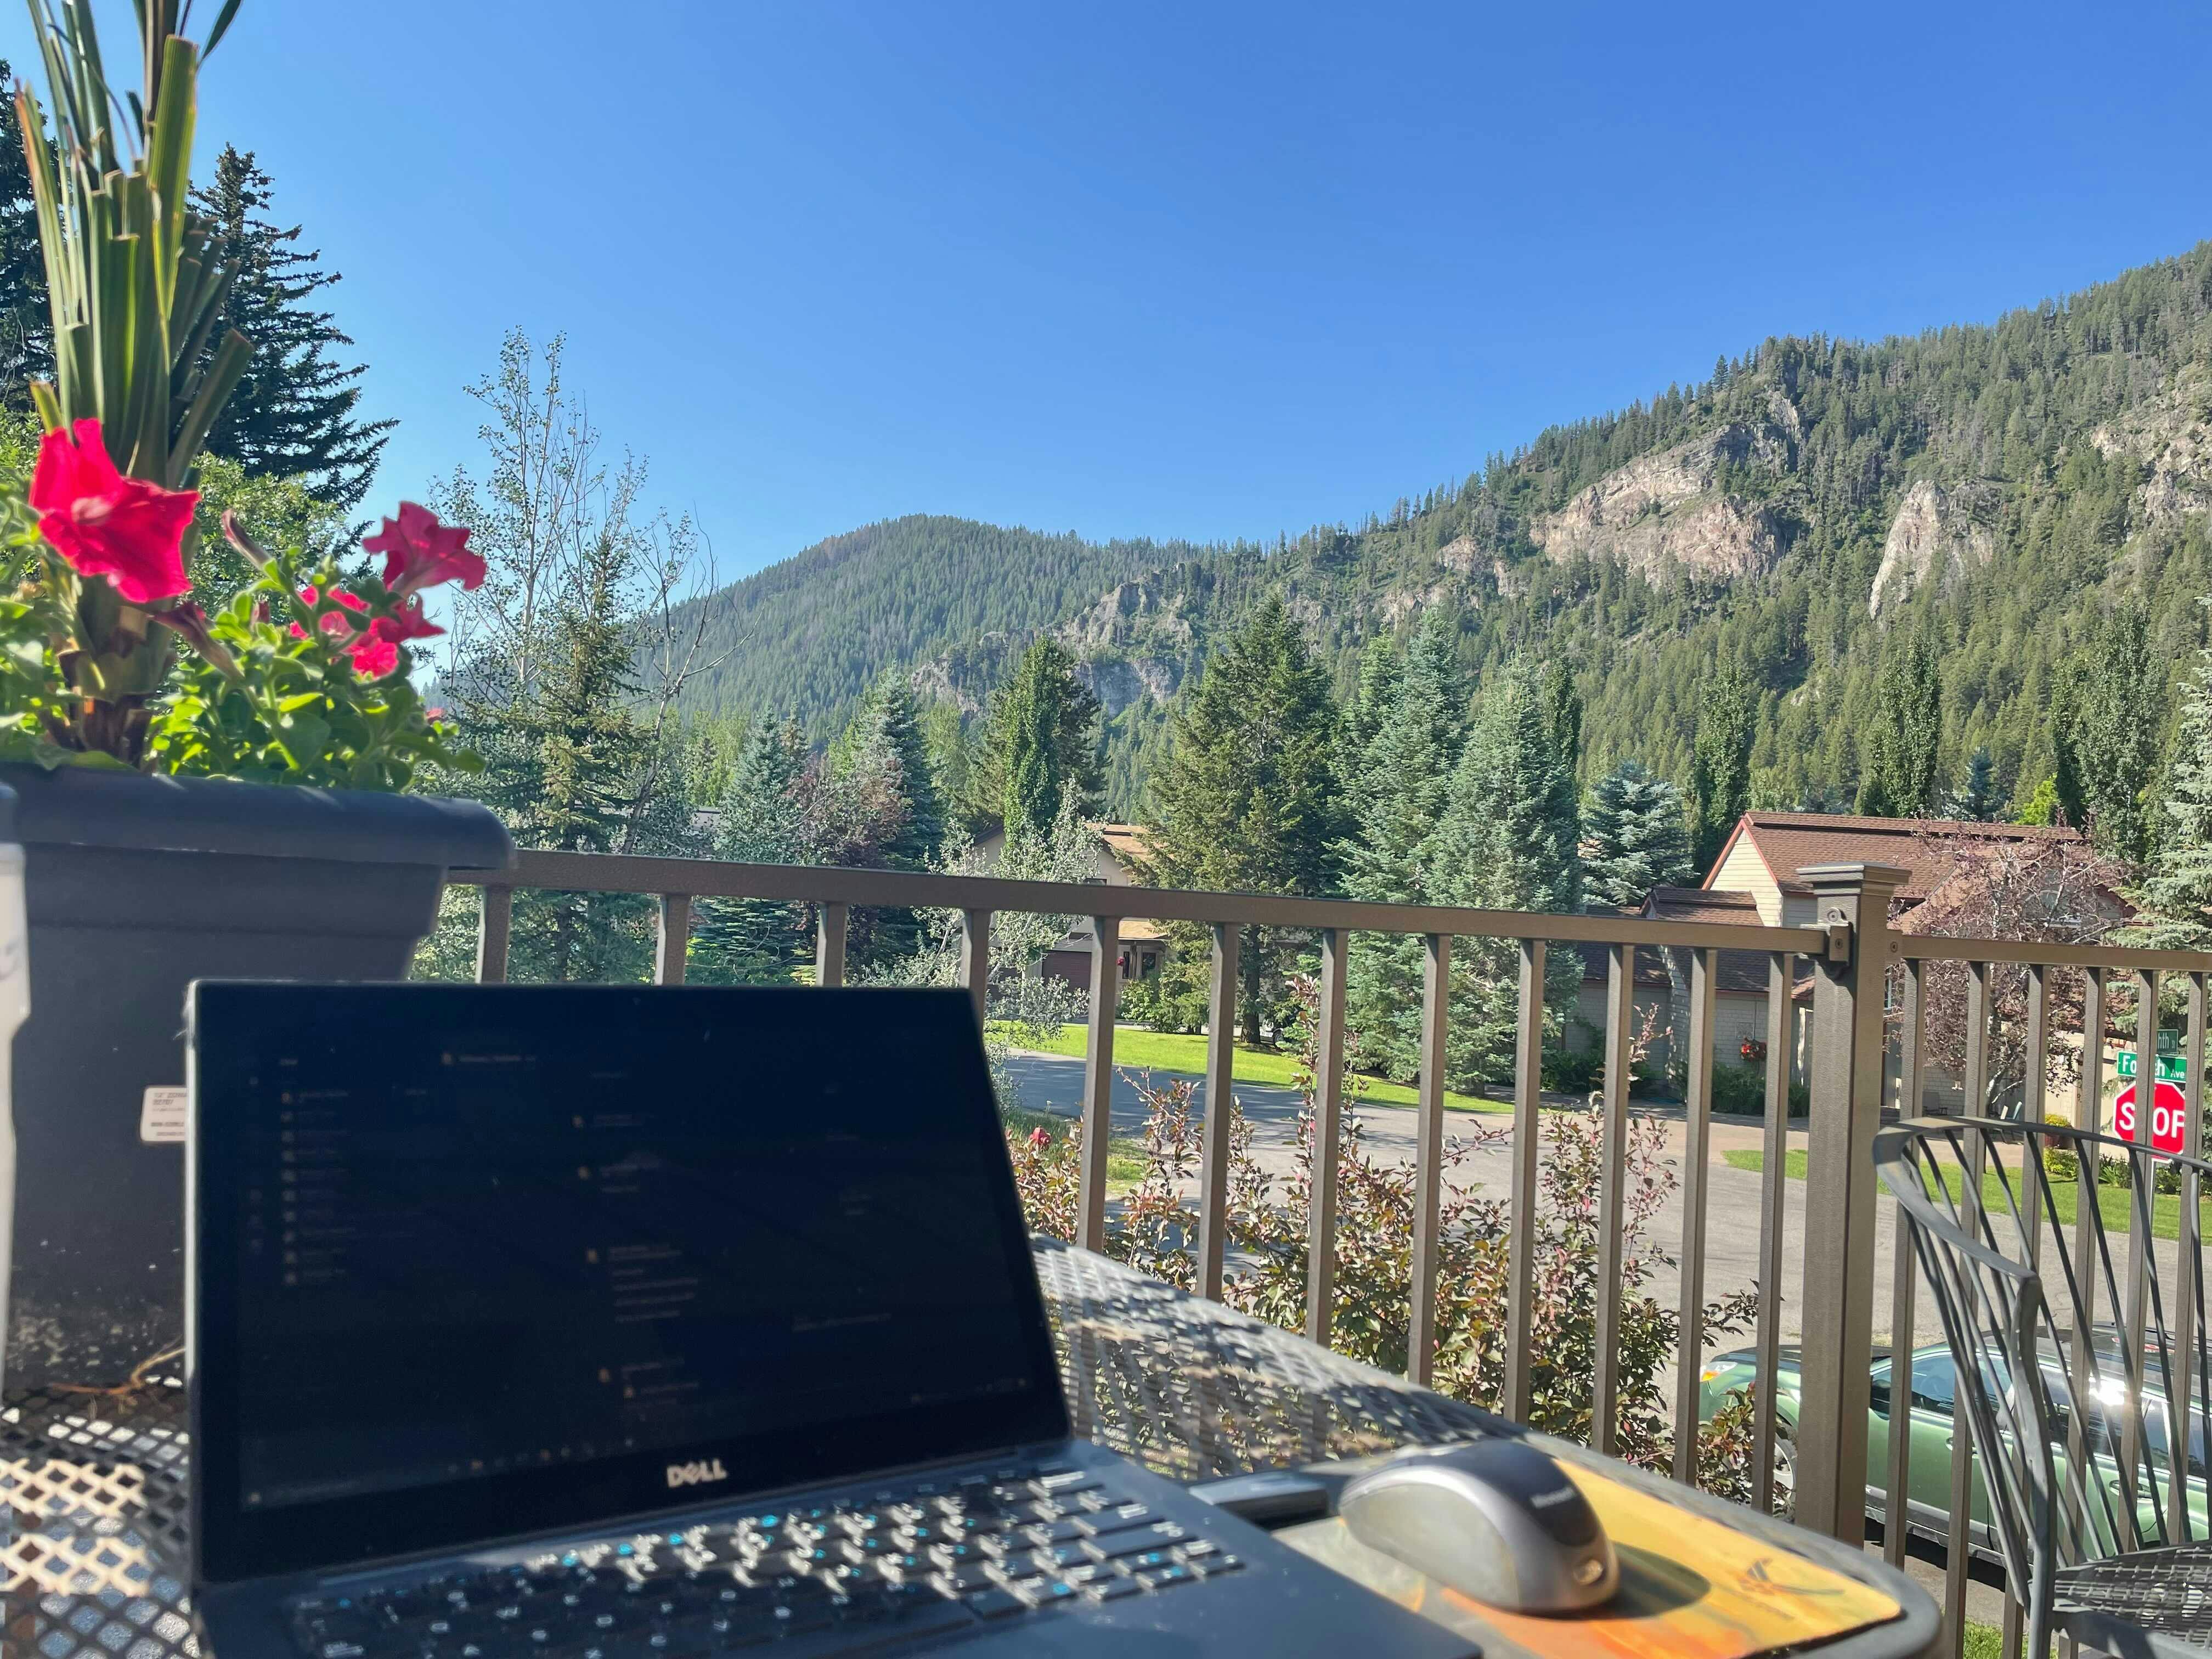 A laptop sits open on an outdoor table on a balcony in front of a mountain view. The sky is blue and the scene is sunny.